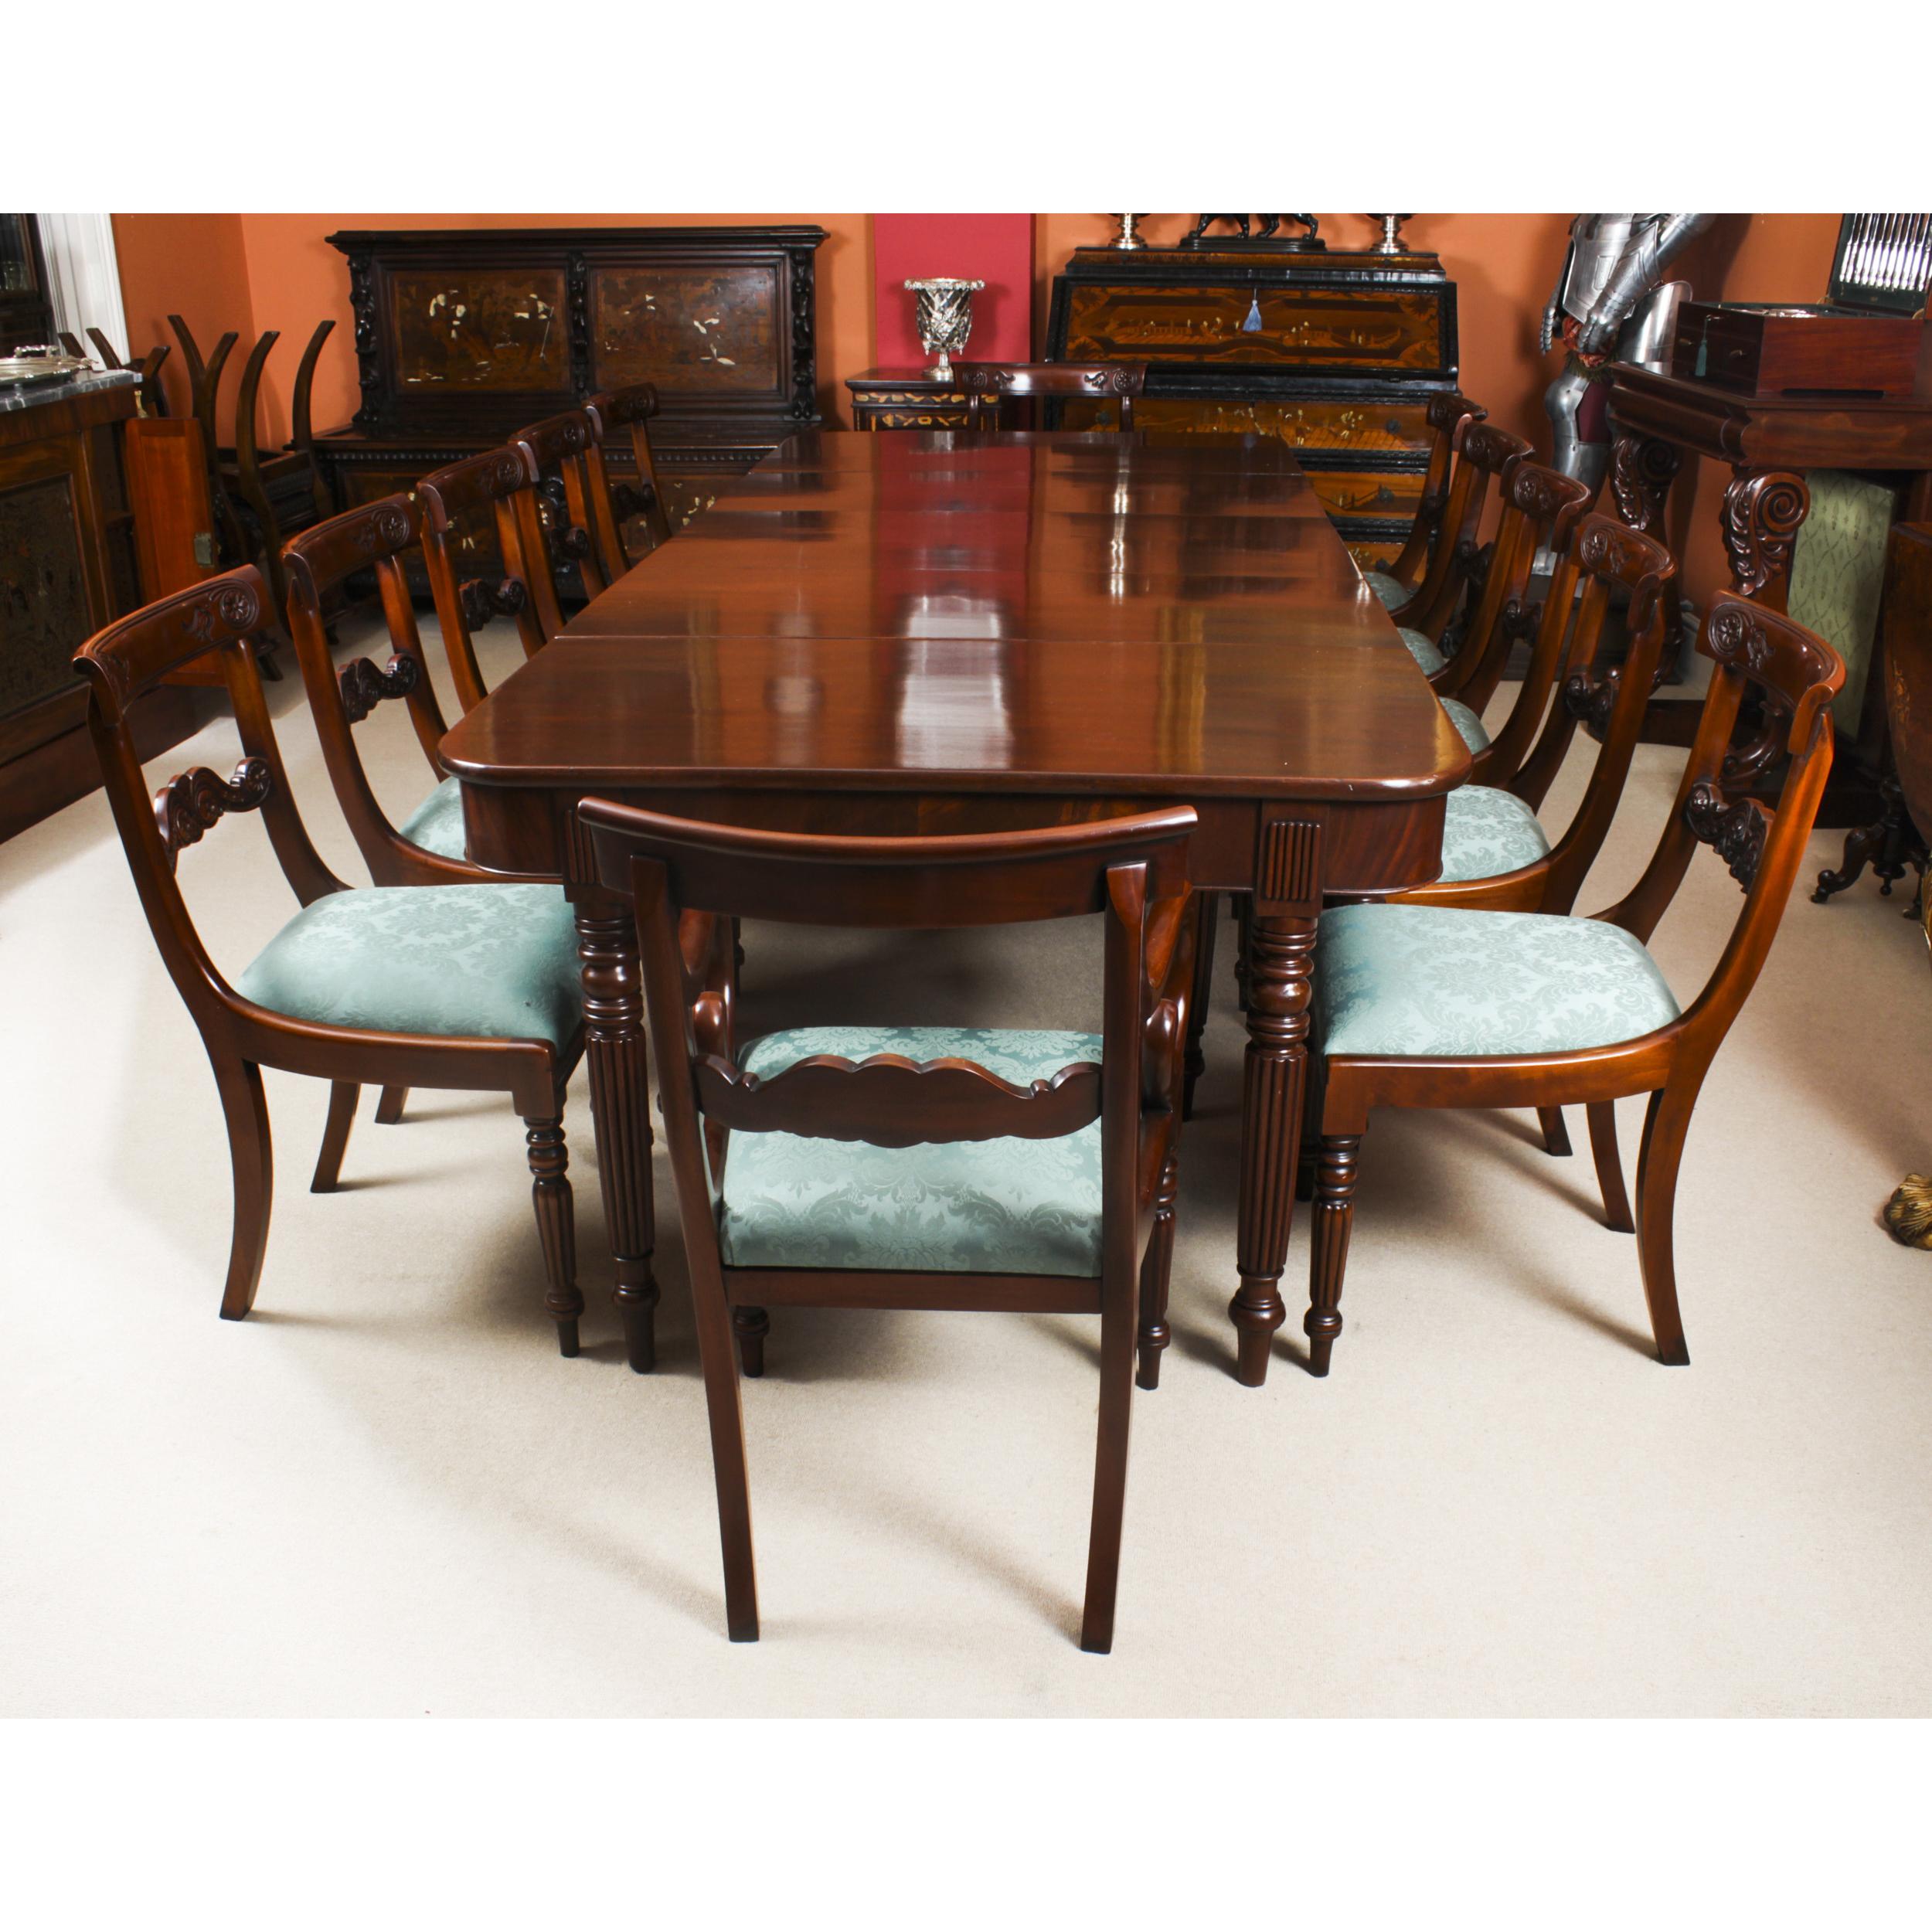 A superb dining suite that comprises a fine antique English Regency Metamorphic dining table in the manner of Gillows, Circa 1830 in date, and a set of twelve barback dining chairs..

This amazing flame mahogany dining table can seat twelve and has